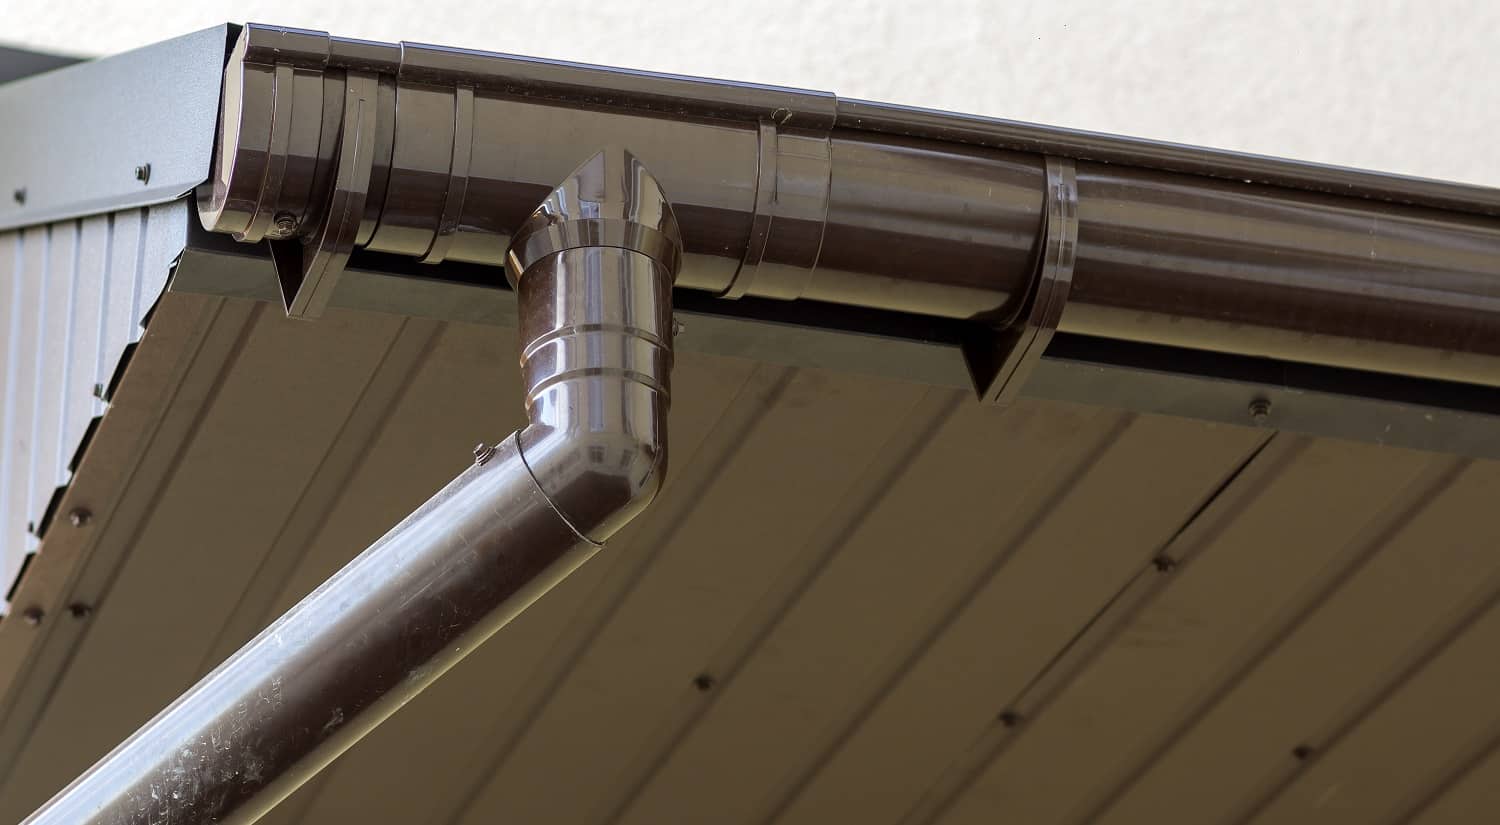 Close-up detail of cottage house corner with brown metal planks siding and roof with steel gutter rain system. Roofing, construction, drainage pipes installation and connection concept.